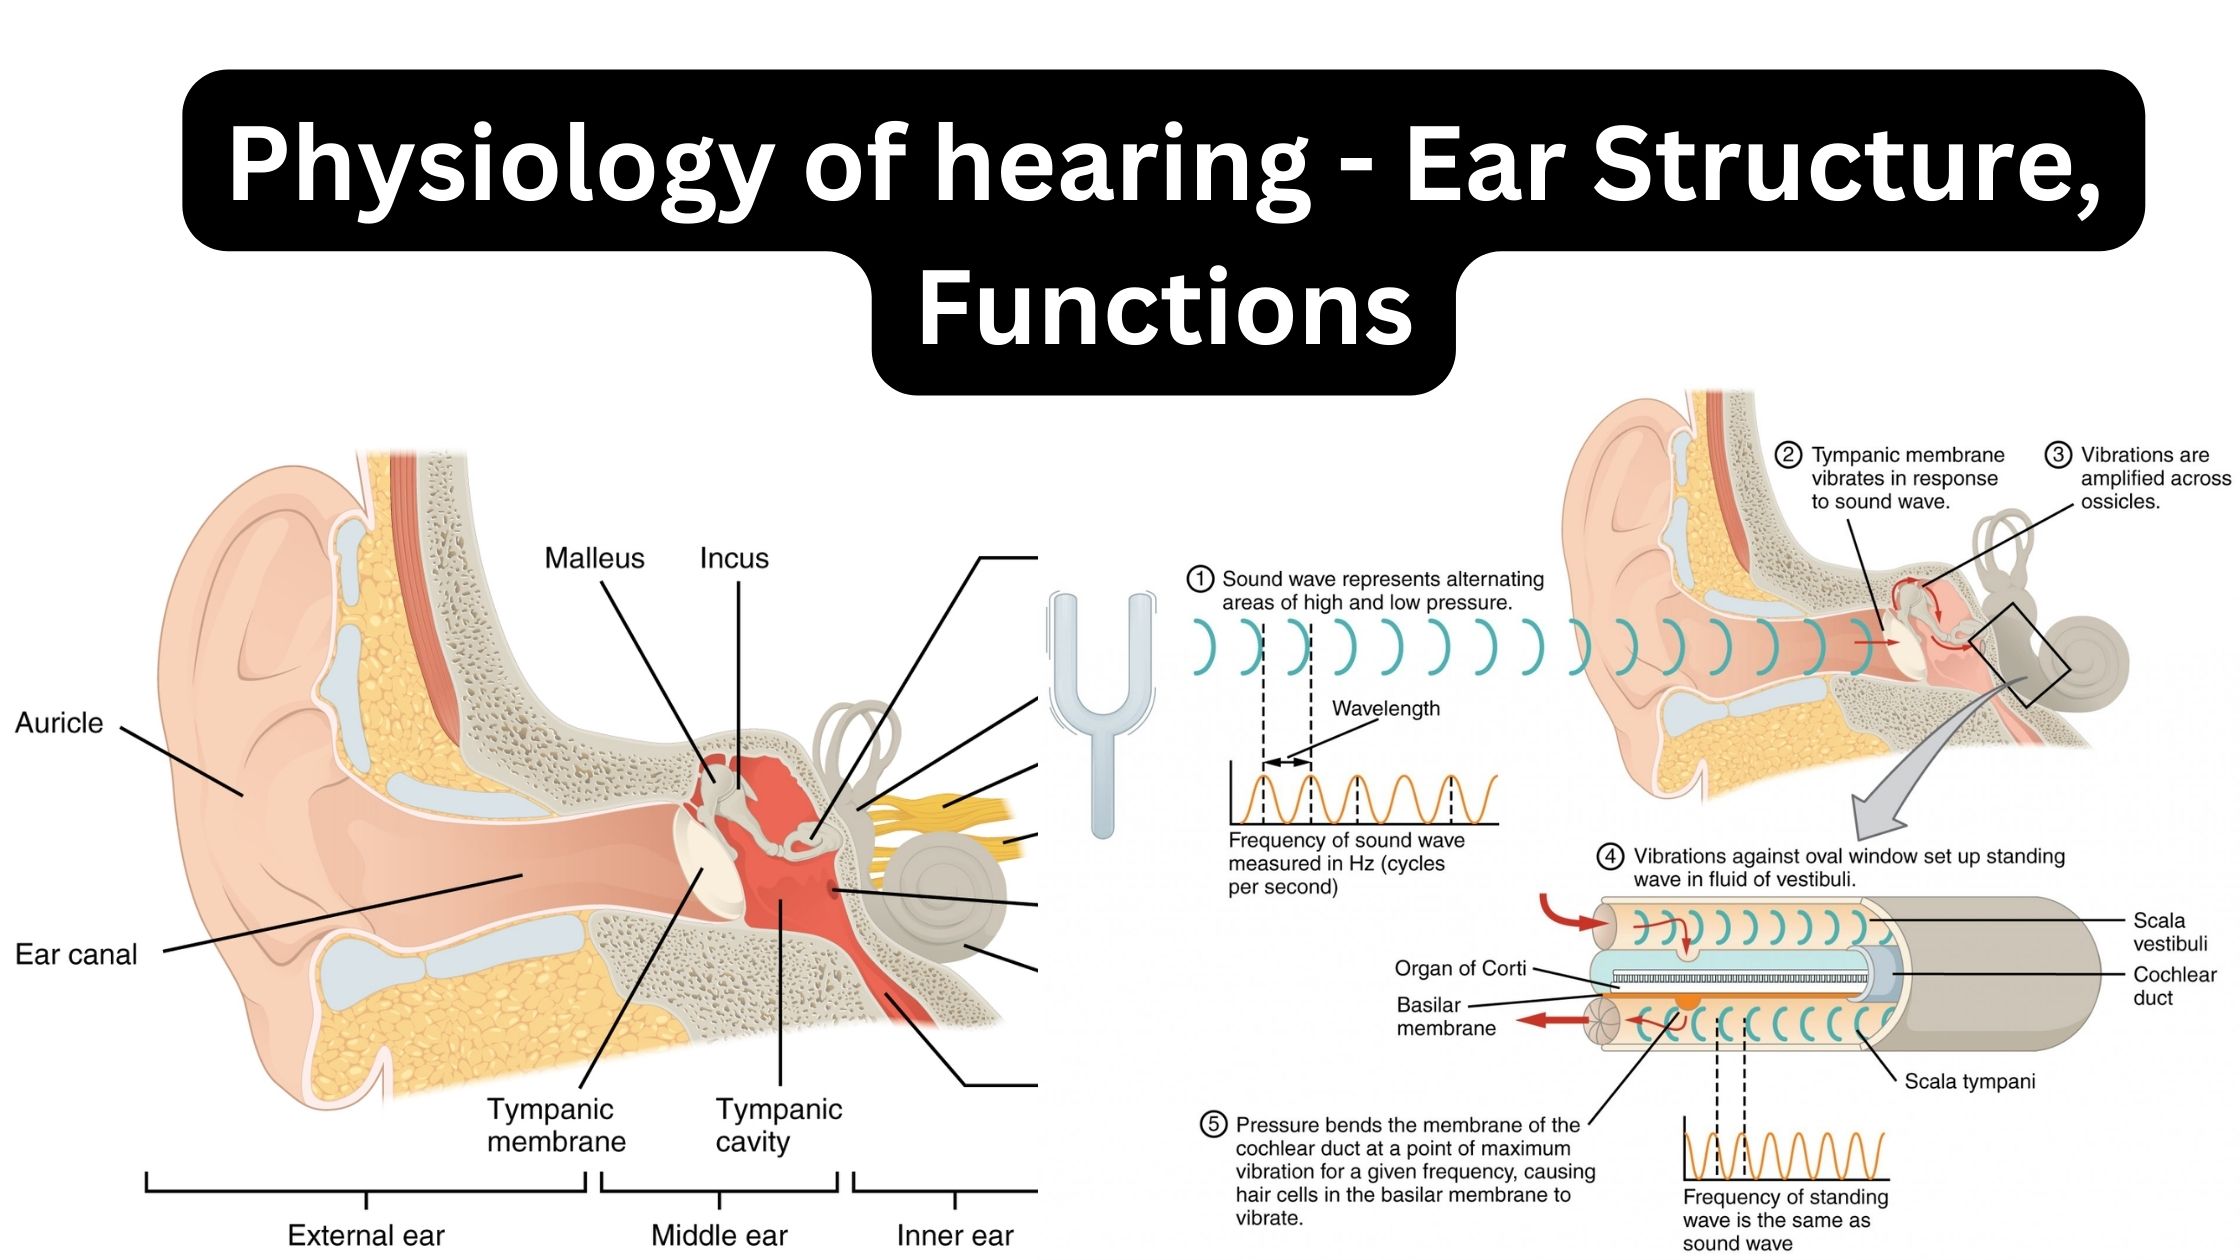 Physiology of hearing - Ear Structure, Functions